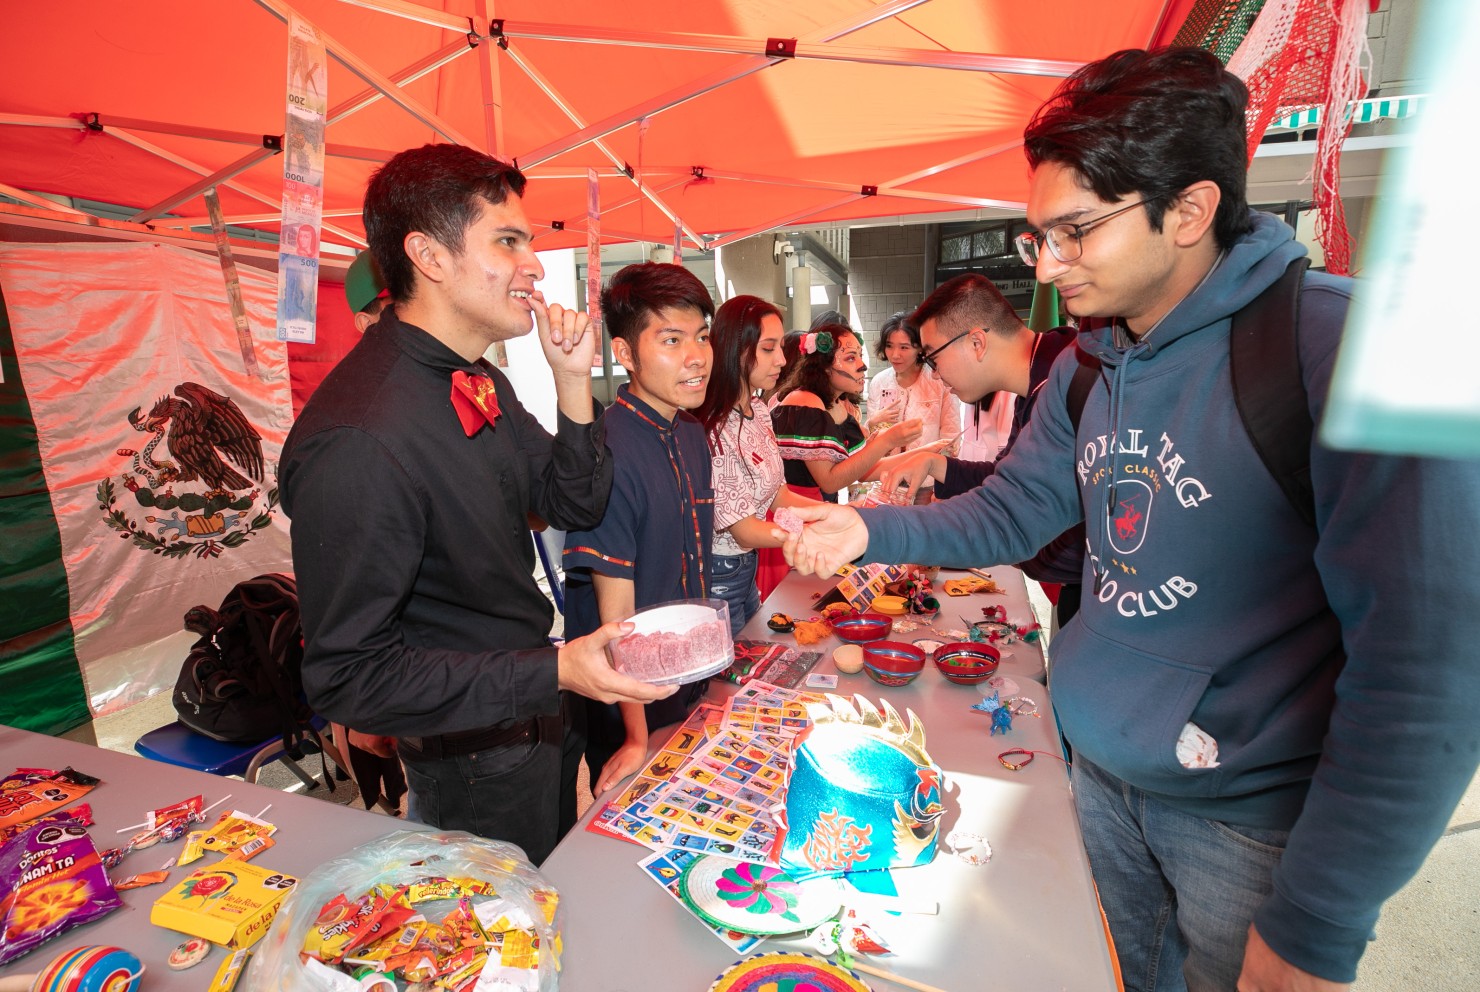 Students from Mexico have prepared a variety of snacks and showed typical Mexican toys.